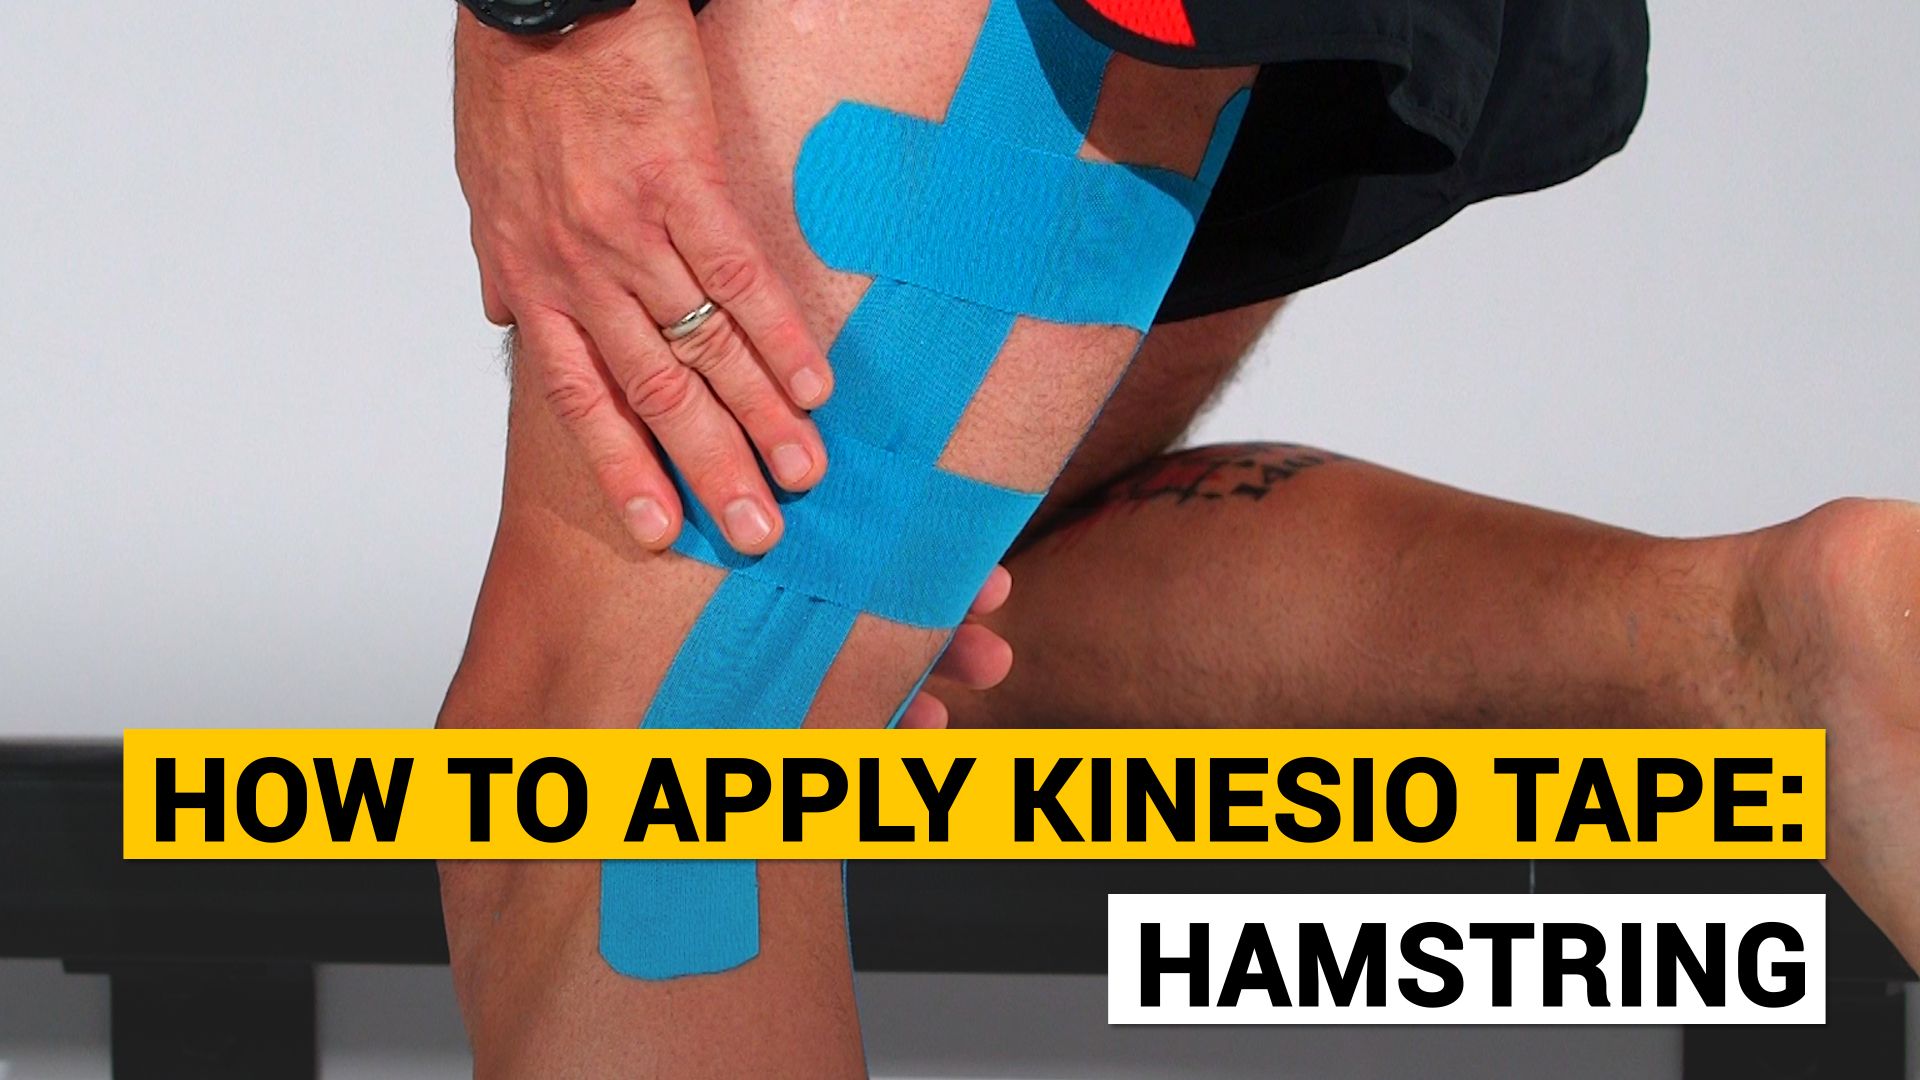 Let's talk about Kinesiology tape for runners.